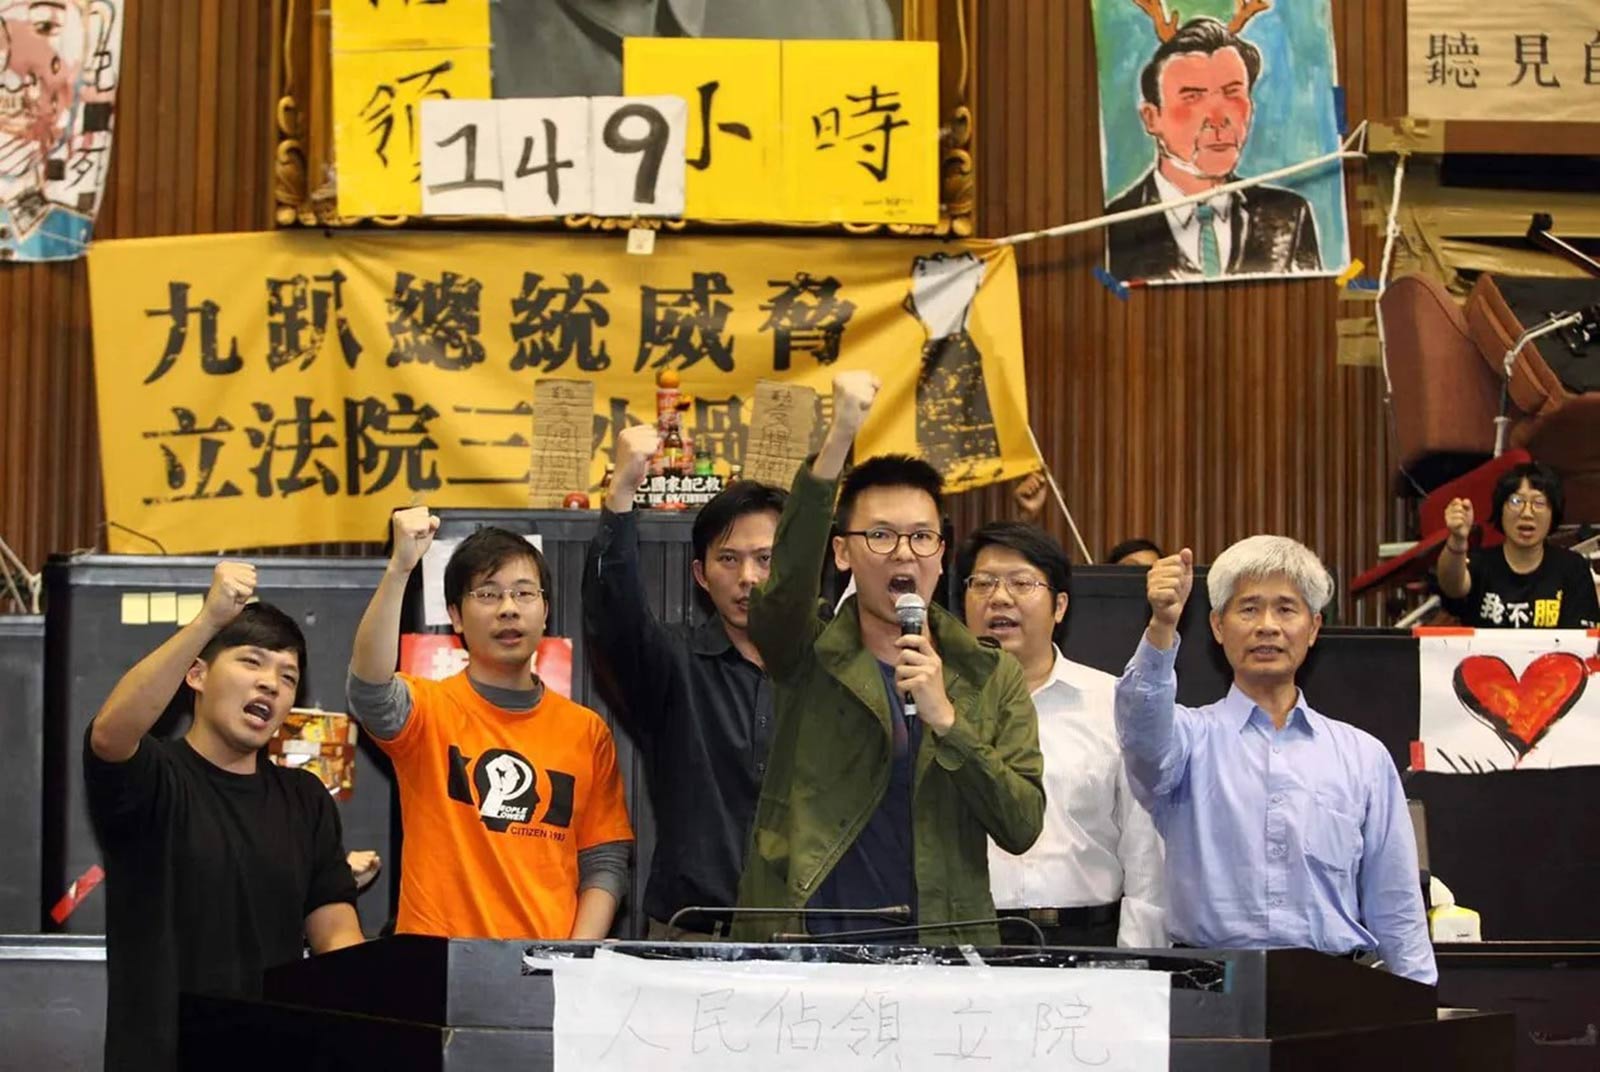 How the Sunflower Movement changed Taiwan